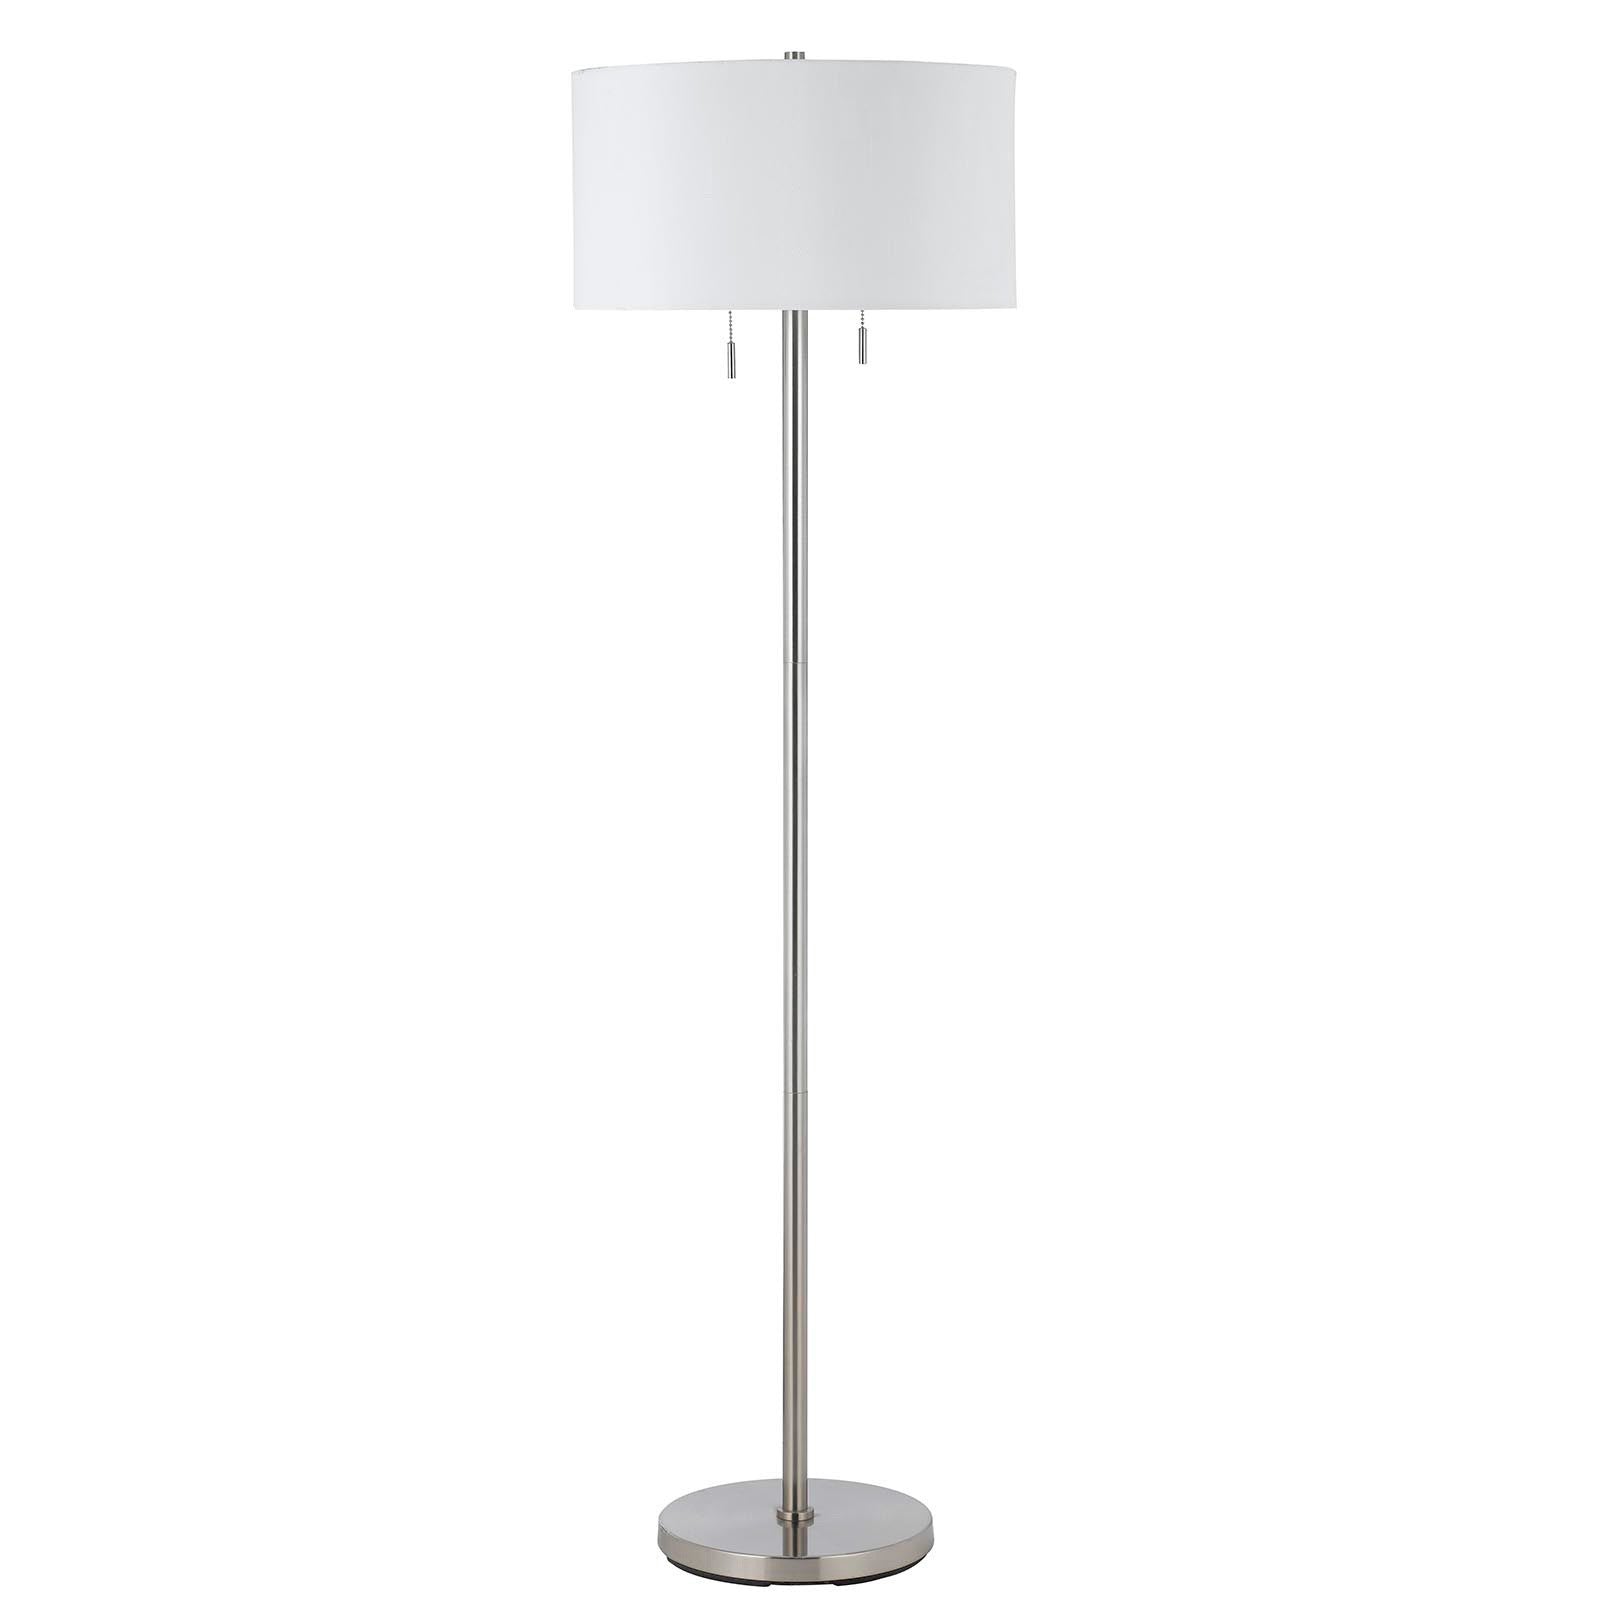 59" Nickel Two Light Traditional Shaped Floor Lamp With White Rectangular Shade